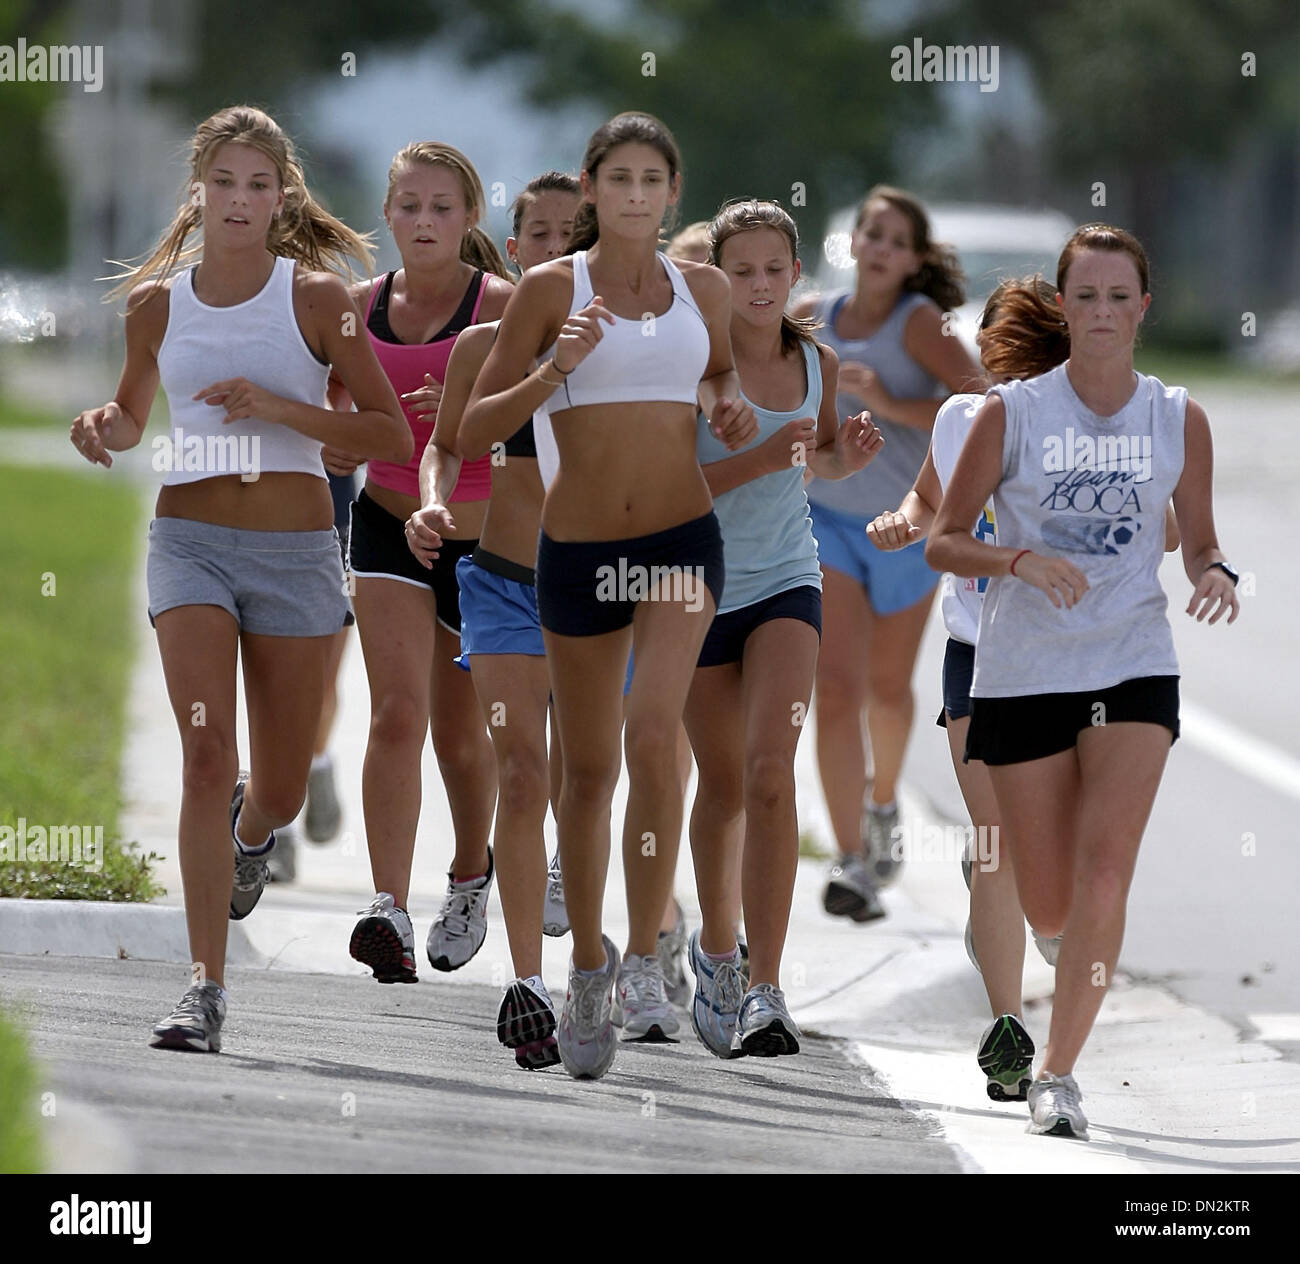 Aug 31, 2006; Boca Raton, FL, USA; Girls on the Spanish River High School  cross country team run along Yamato Road on a training run, Thursday  afternoon. (L-R front) Runner in grey